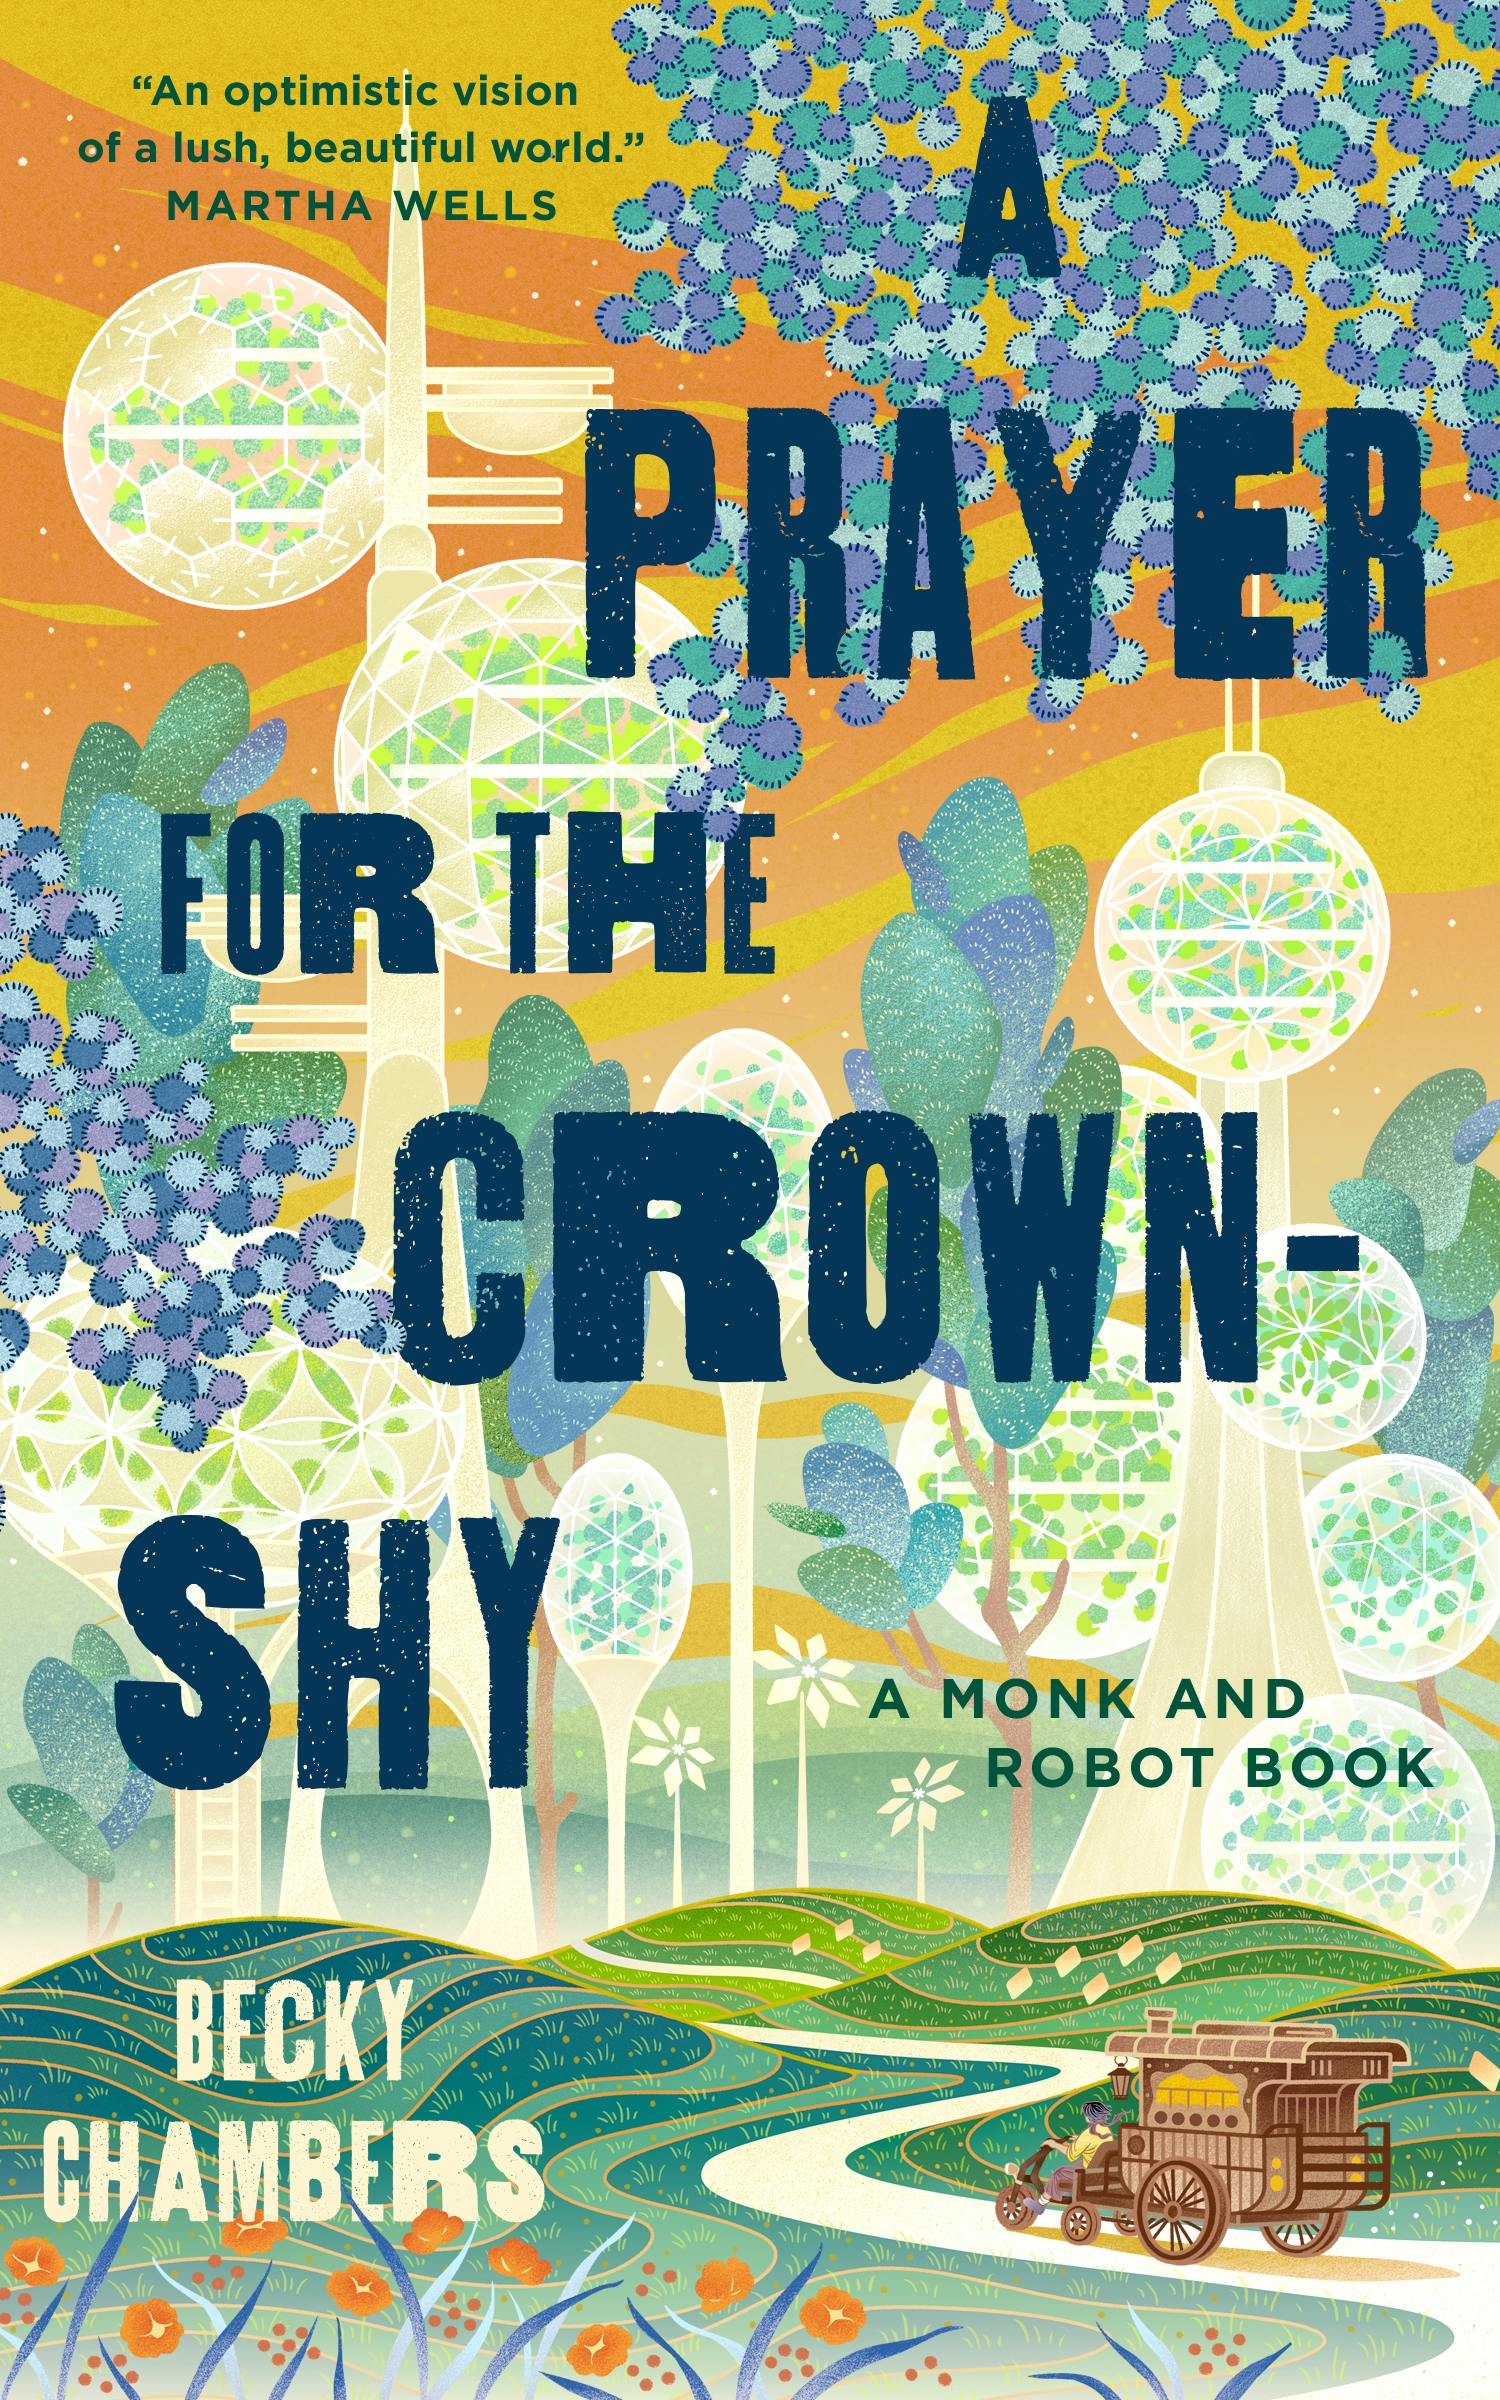 A Prayer for the Crown-Shy : A Monk and Robot Book by Becky Chambers